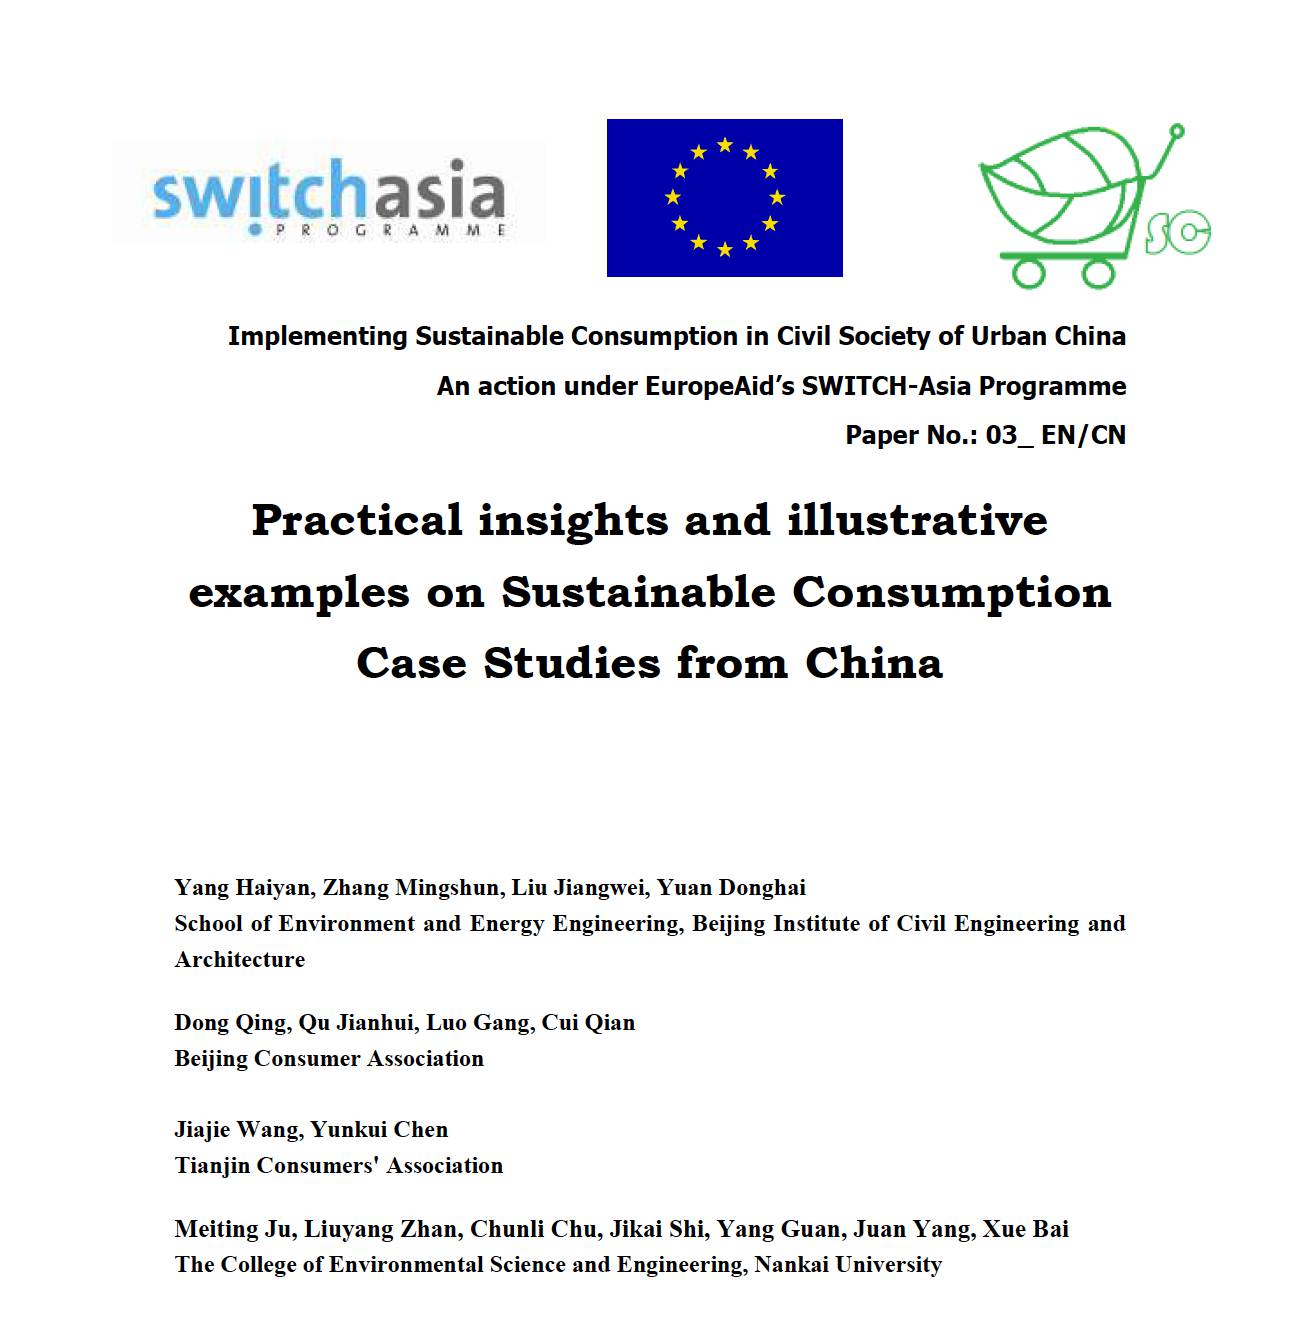 Practical insights and illustrative examples on Sustainable Consumption Case Studies from China